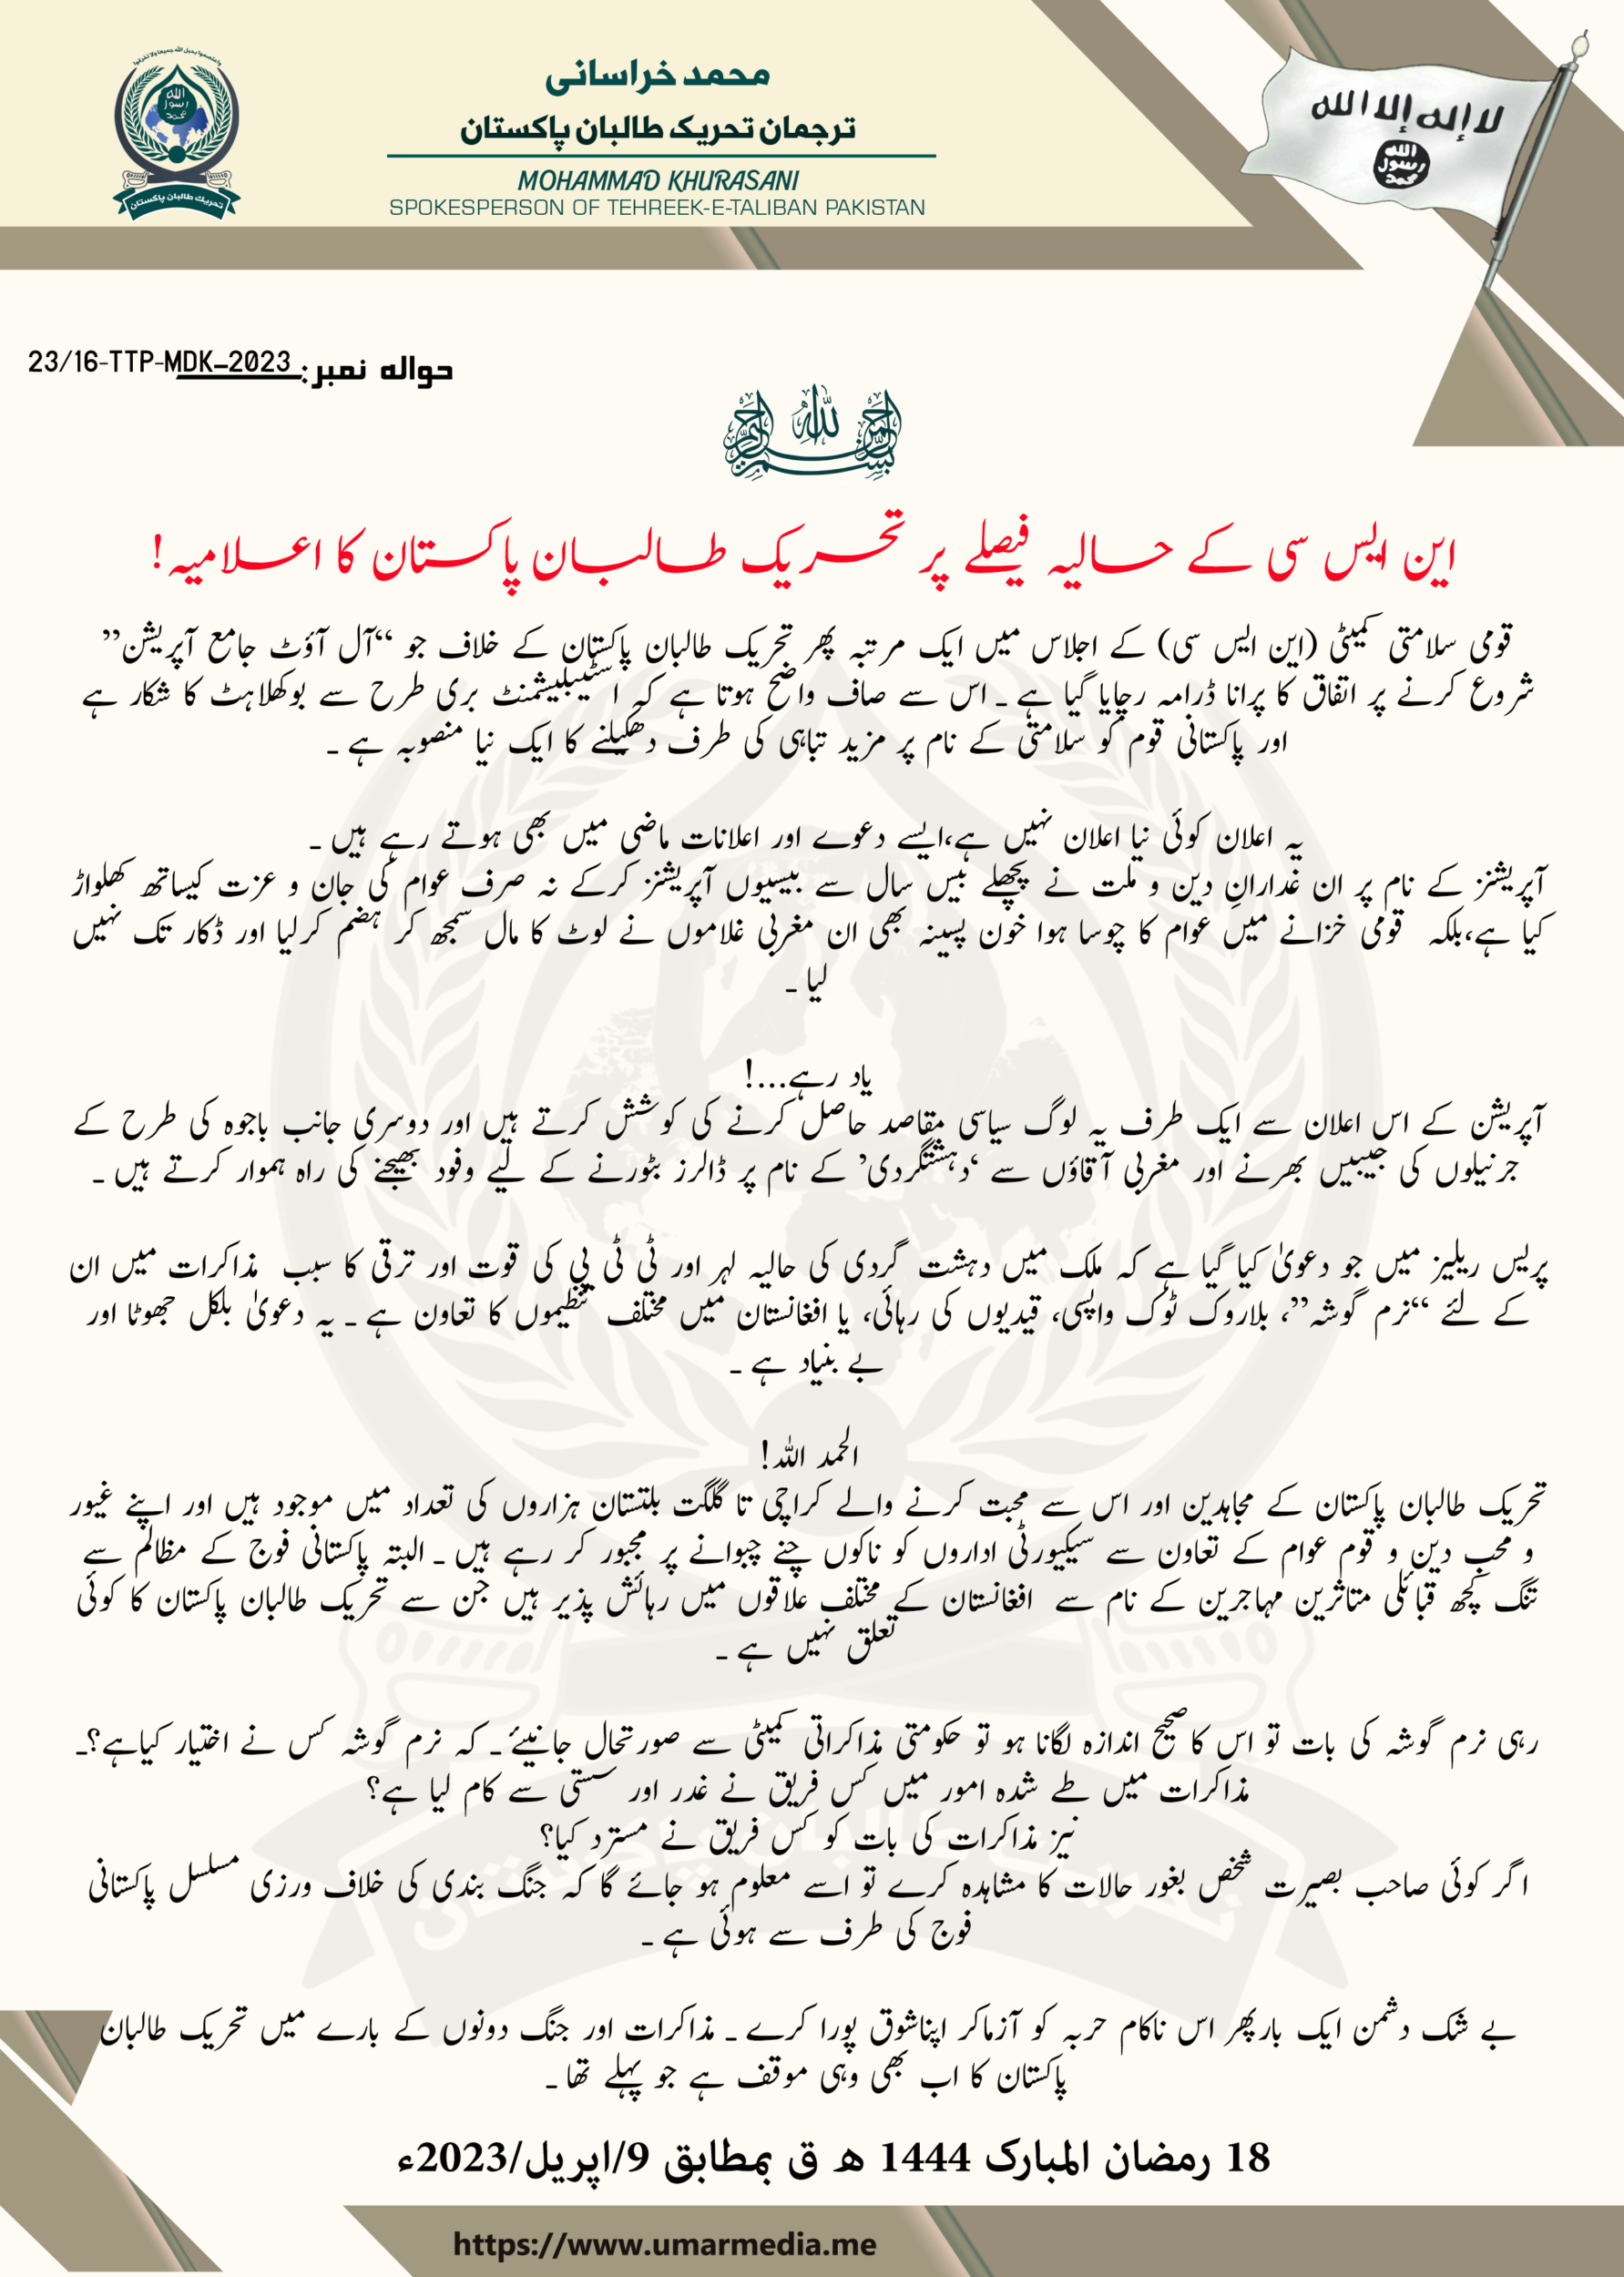 (Statement) Tehreek-e-Taliban Pakistan (TTP) Publish Statement on National Security Committee Decision to Launch "All-Out Comprehensive Operation" Against the TTP - 10 April 2023